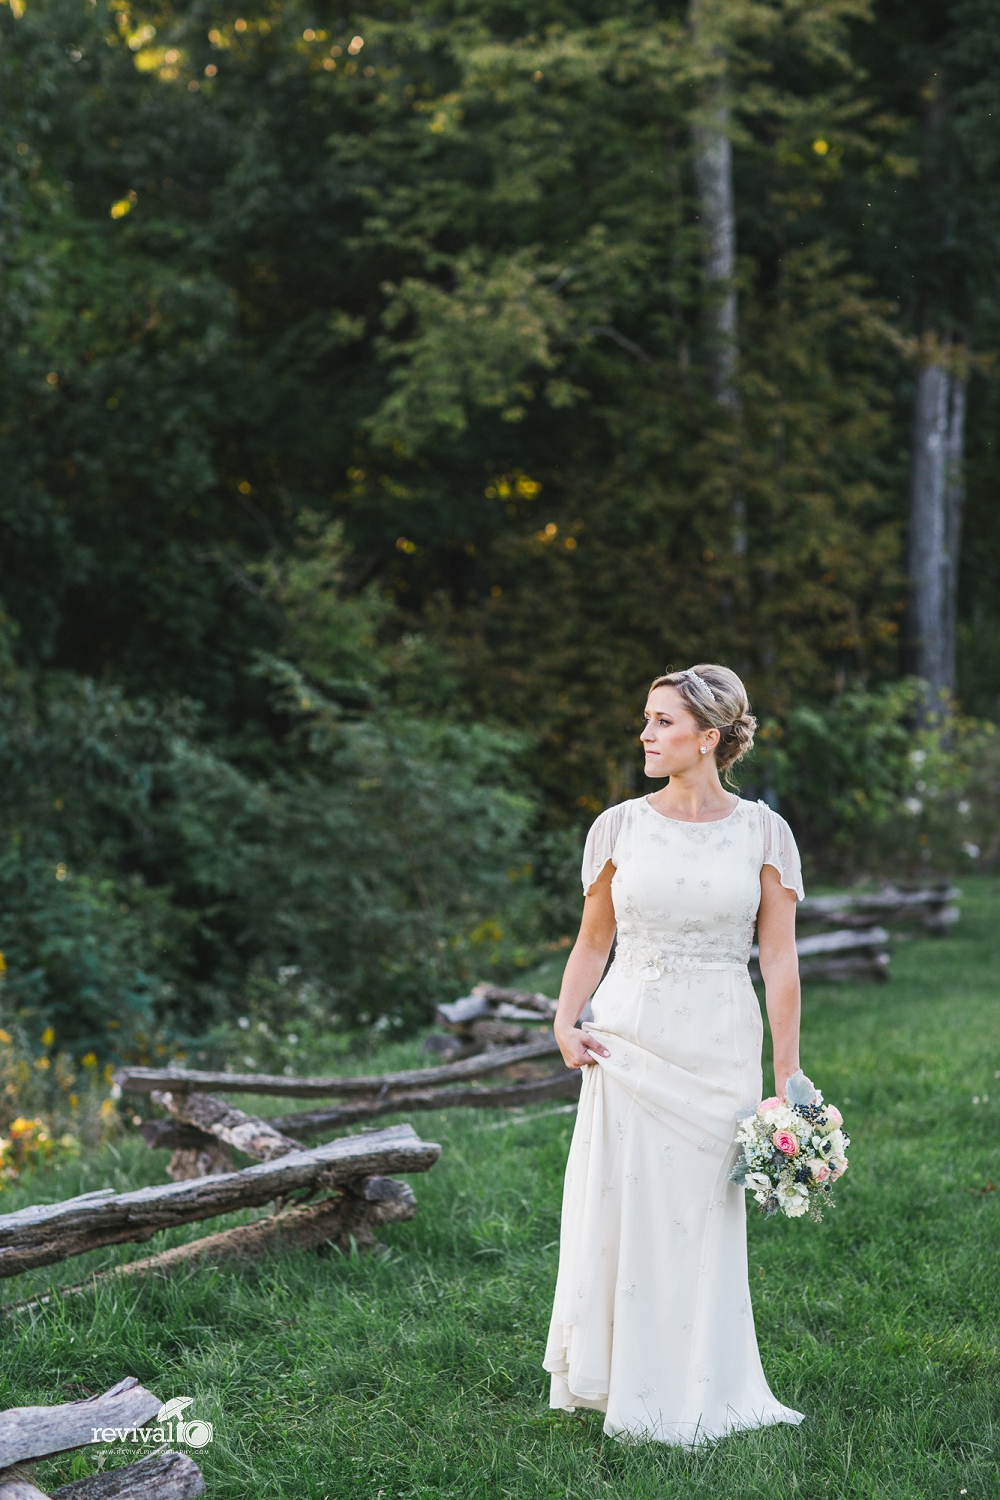 5 Wedding Dress Tips (finding a dress that is both lovely AND comfortable)